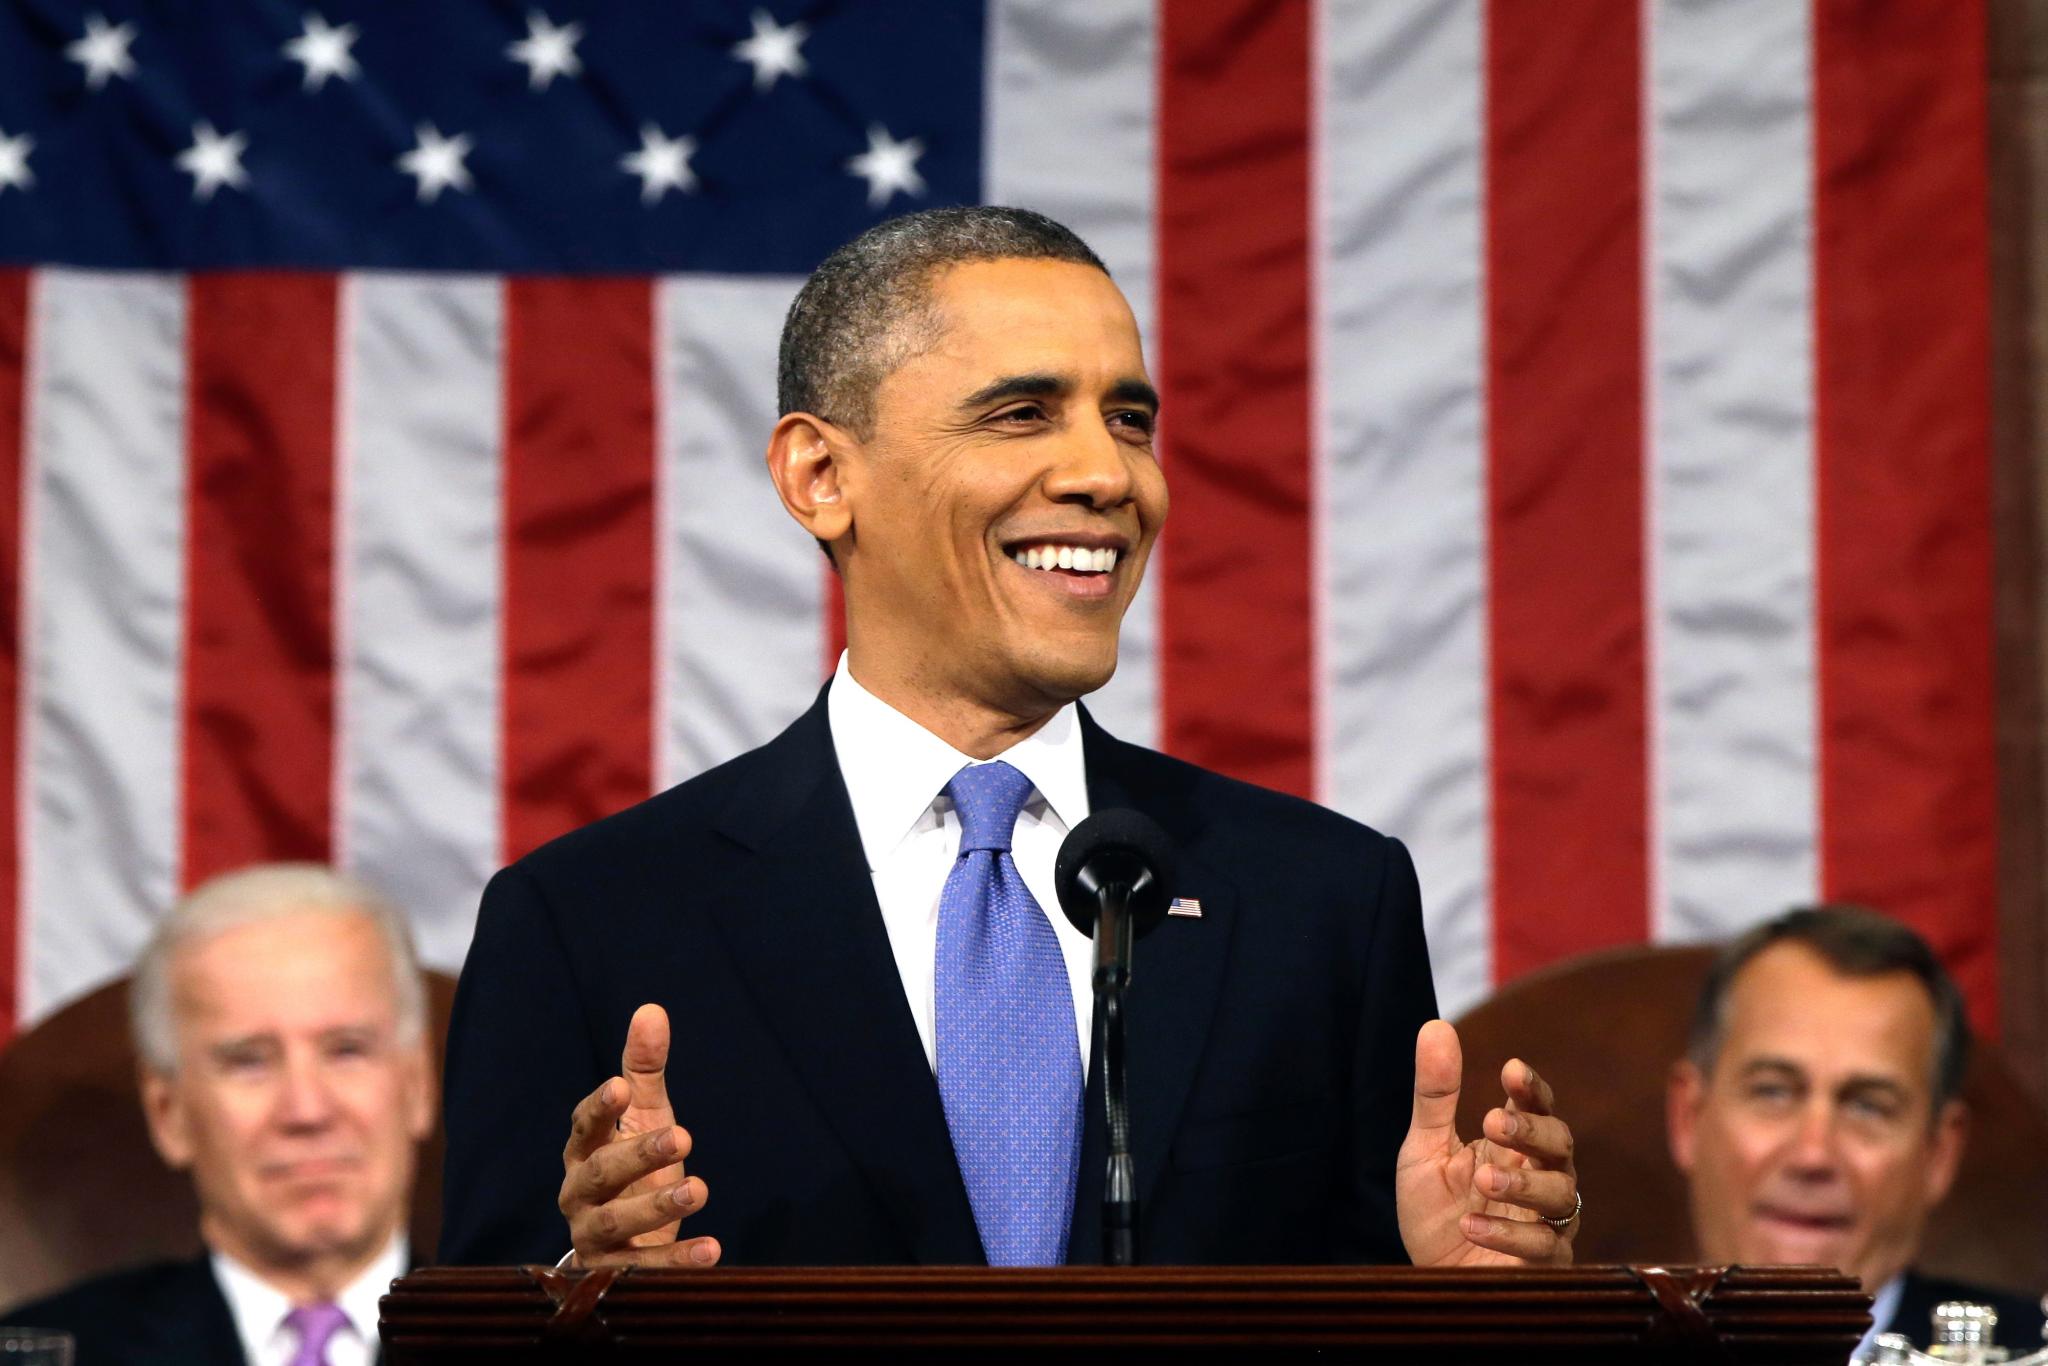 What Was the Highlight of the State of the Union Address?